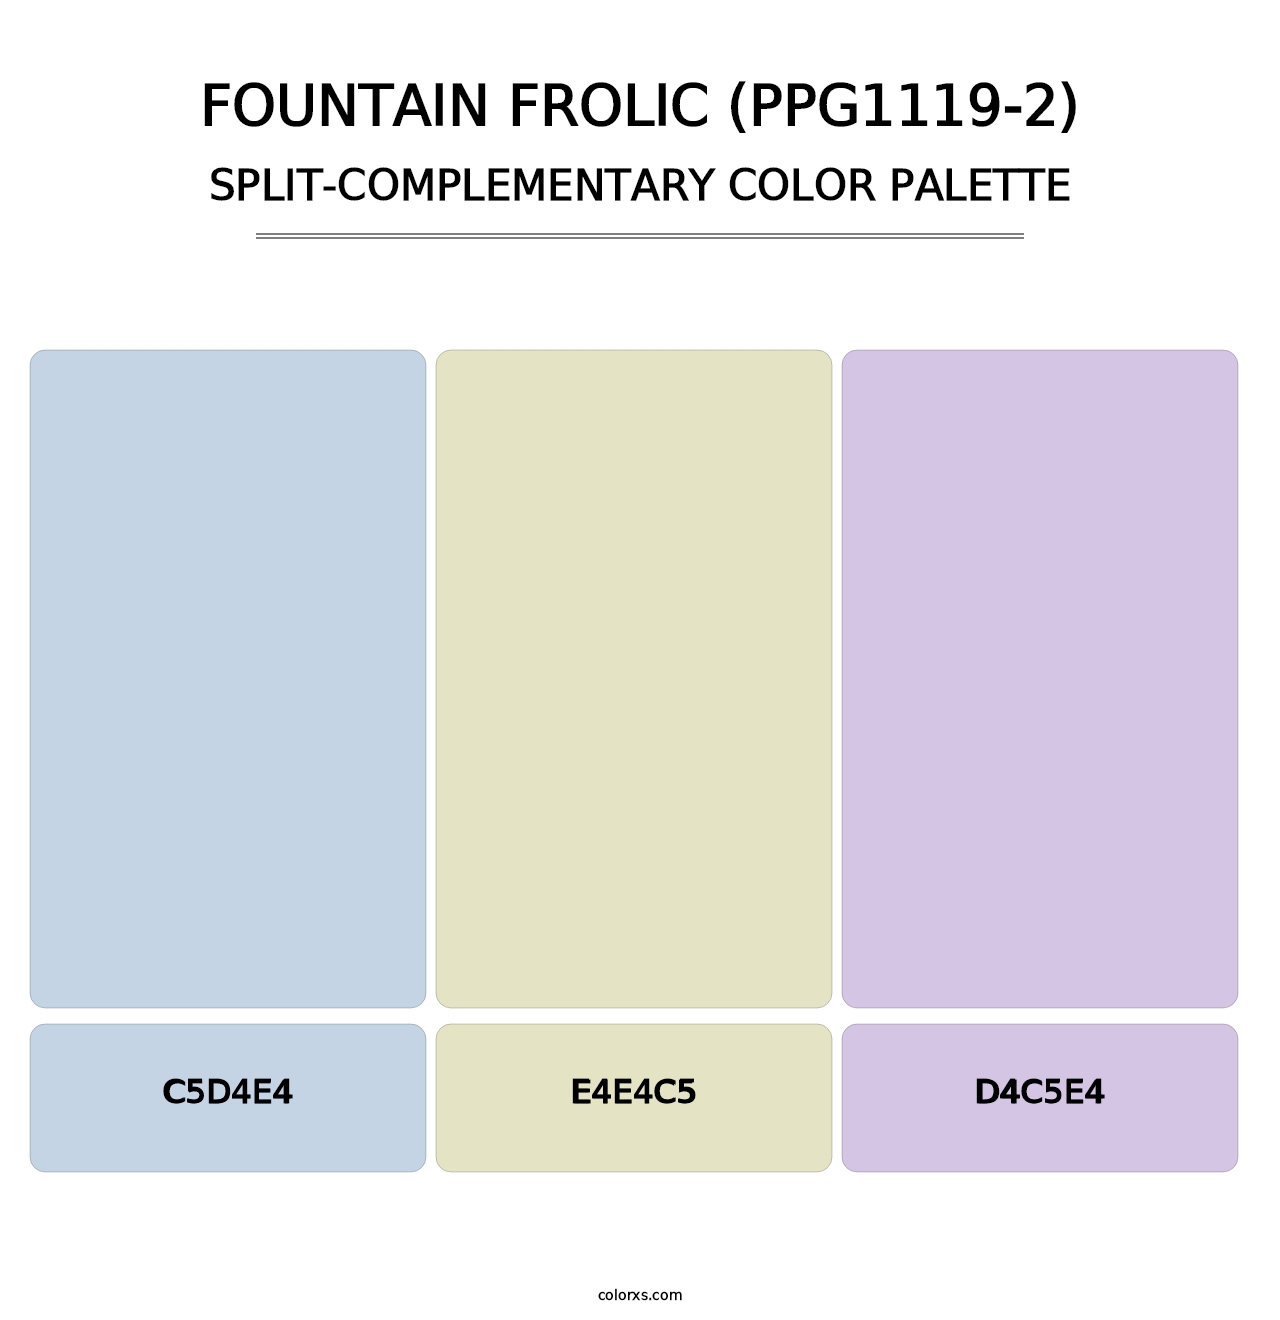 Fountain Frolic (PPG1119-2) - Split-Complementary Color Palette